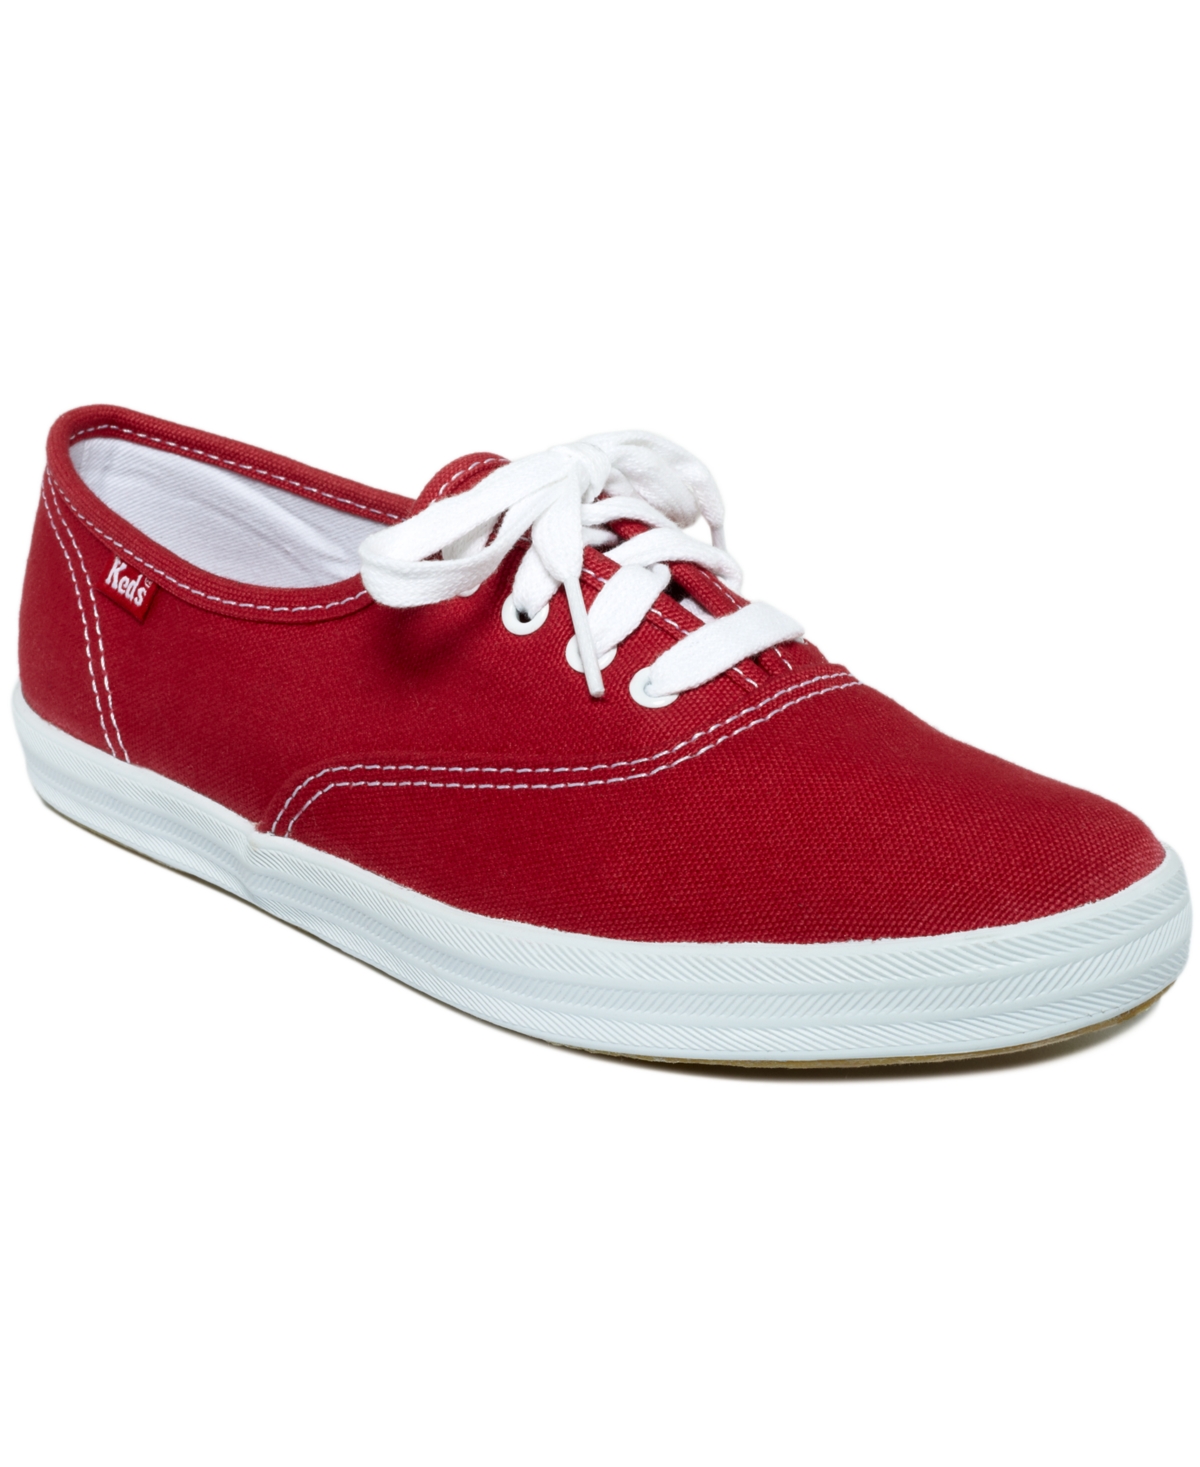 UPC 044209535789 product image for Keds Women's Champion Ortholite Lace-Up Oxford Fashion Sneakers from Finish Line | upcitemdb.com